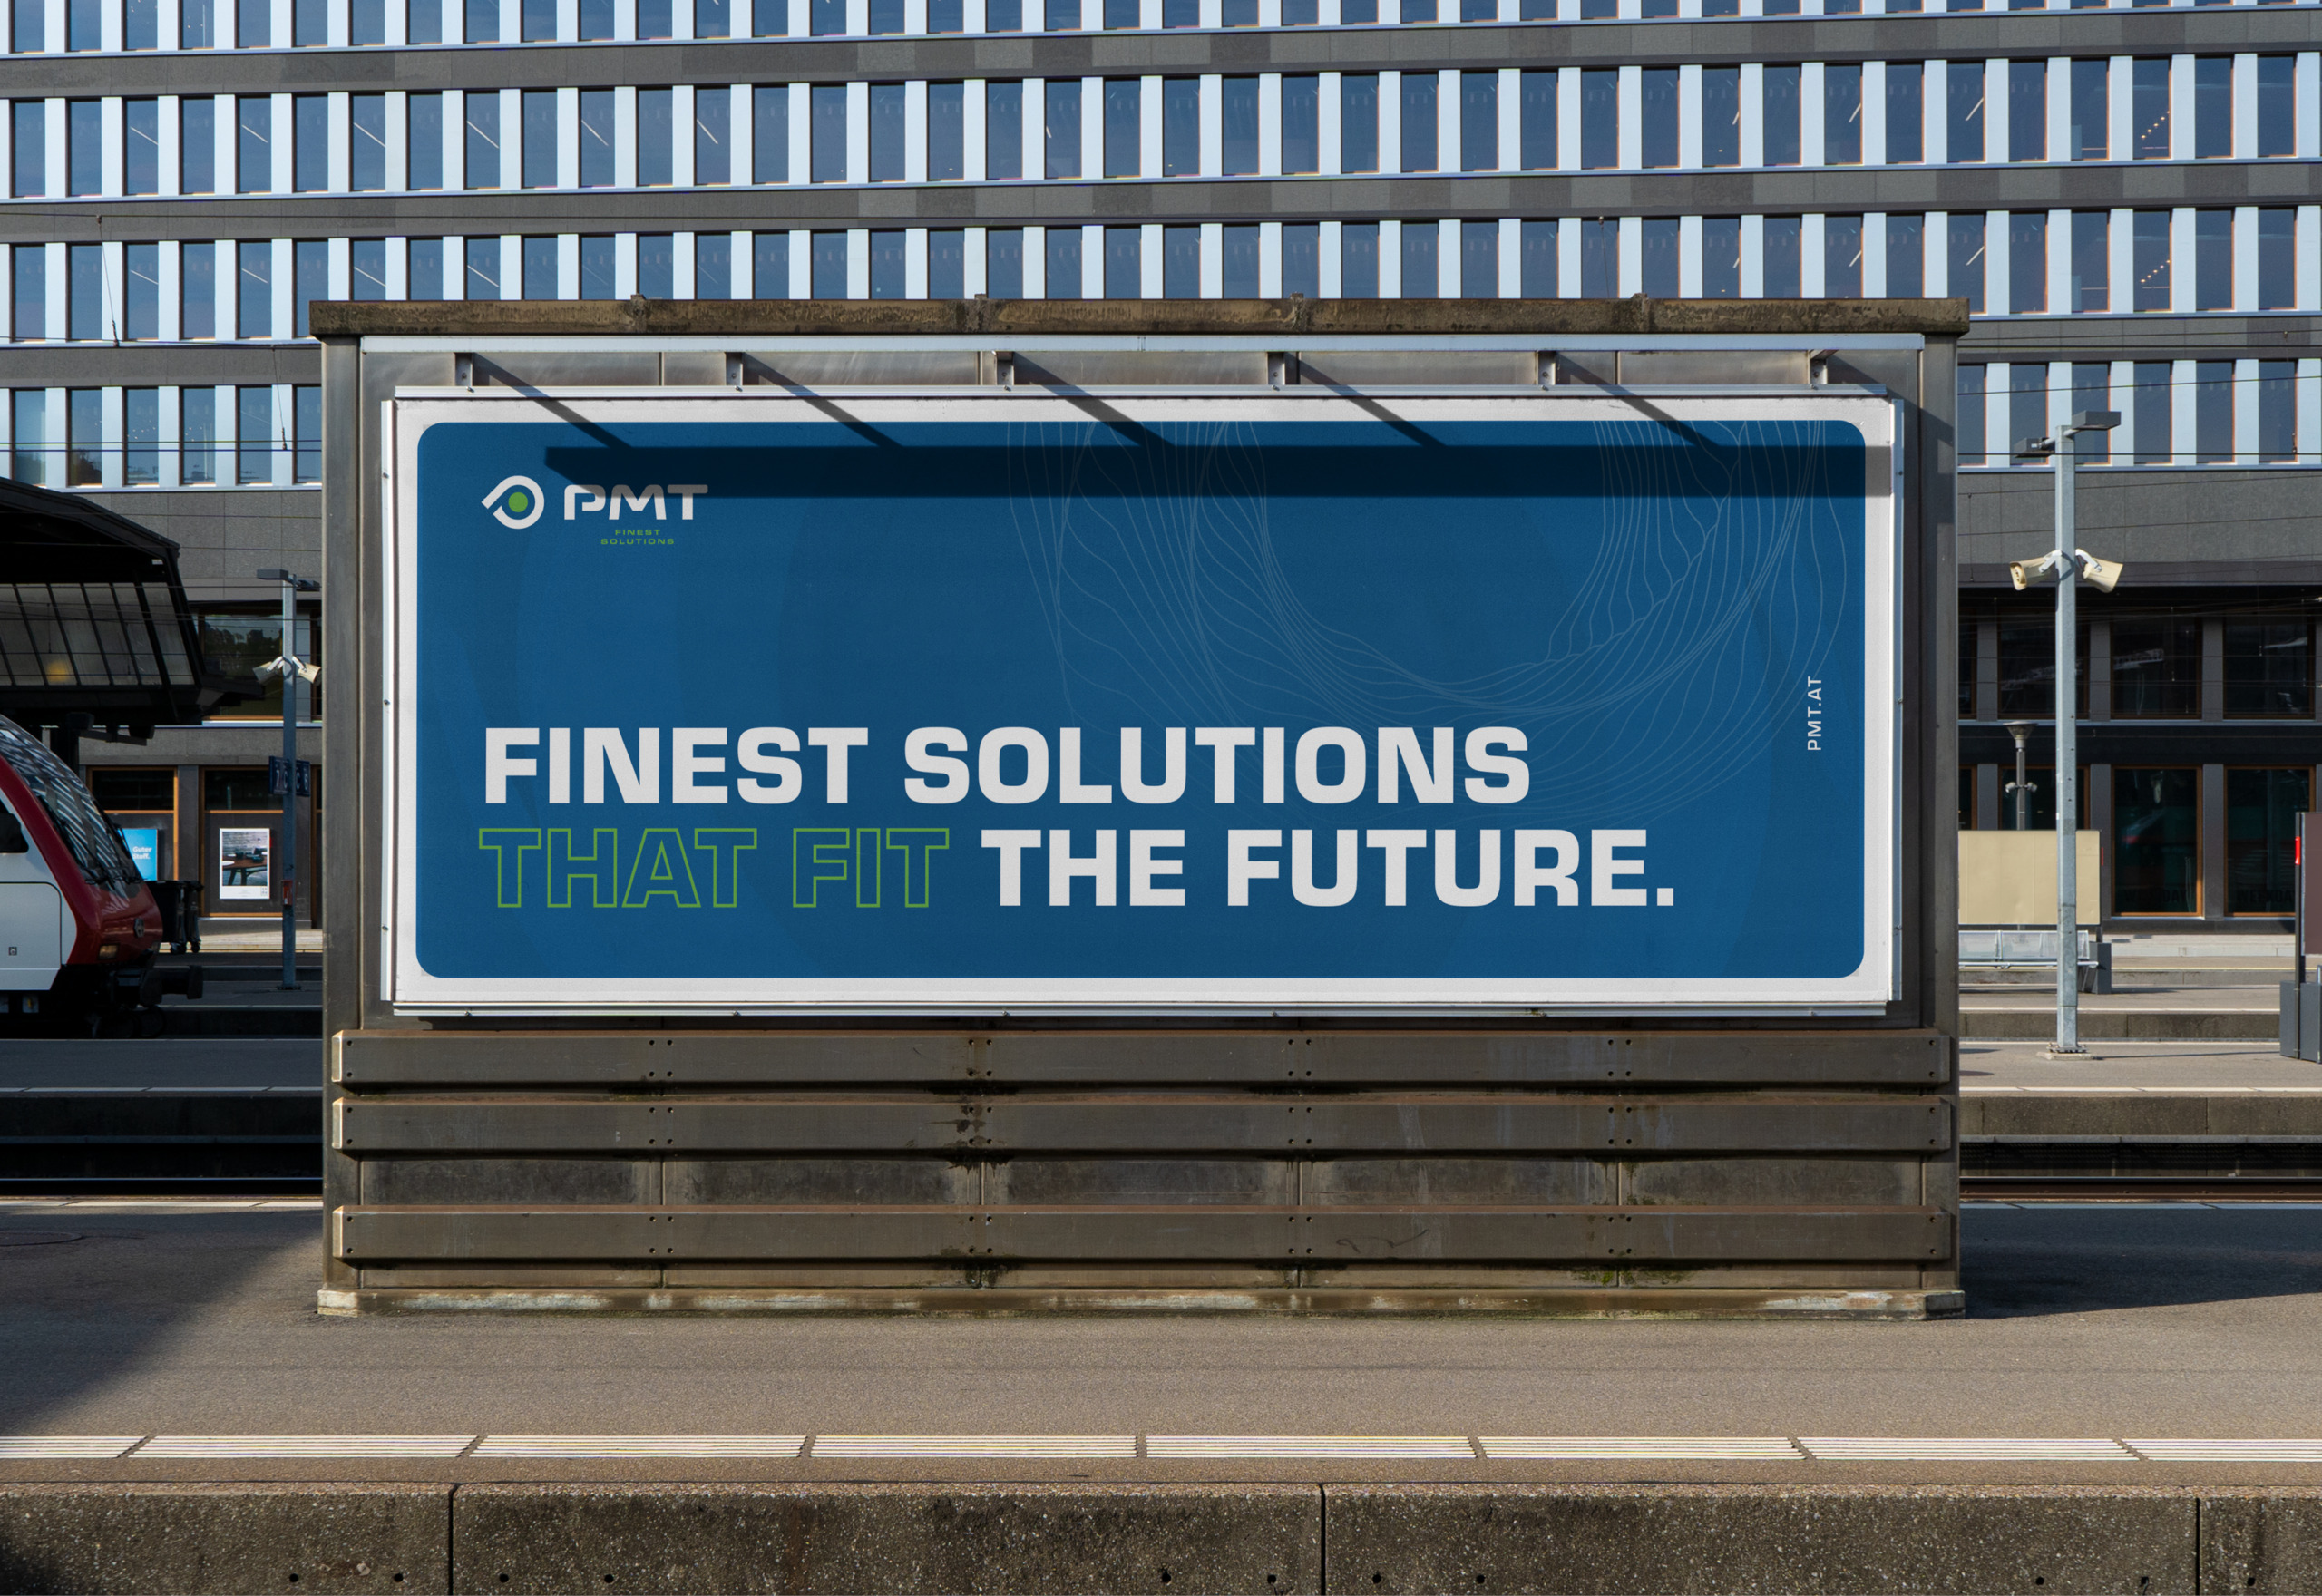 A billboard advertising future solutions for PMT.